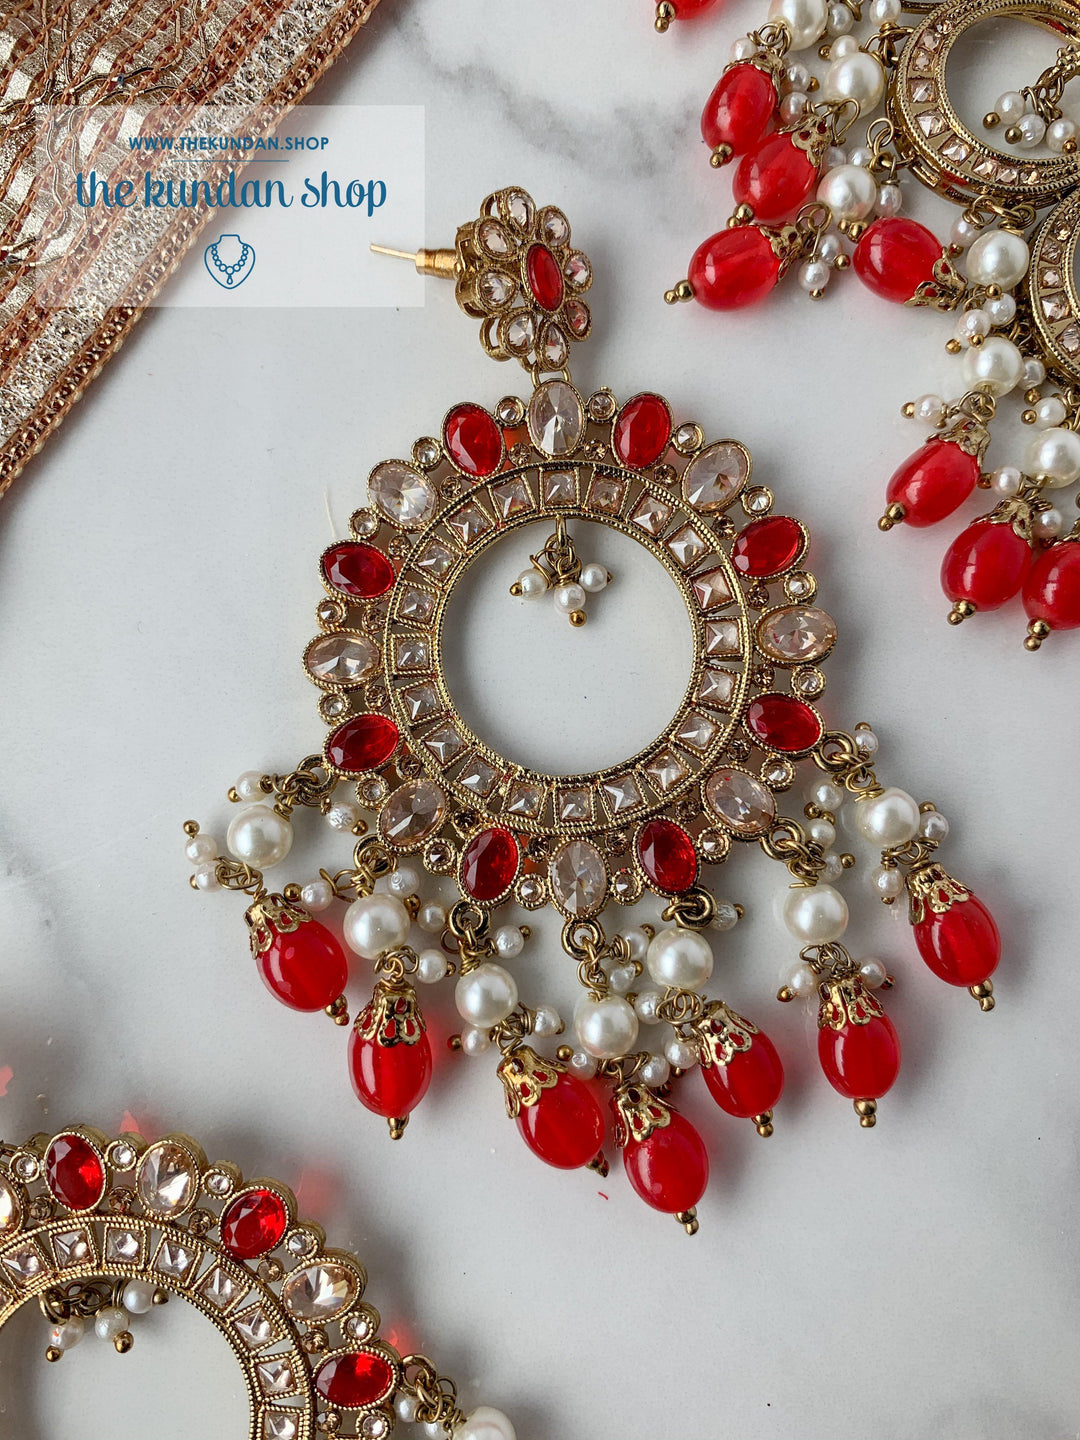 Miracle in Red Necklace Sets THE KUNDAN SHOP 